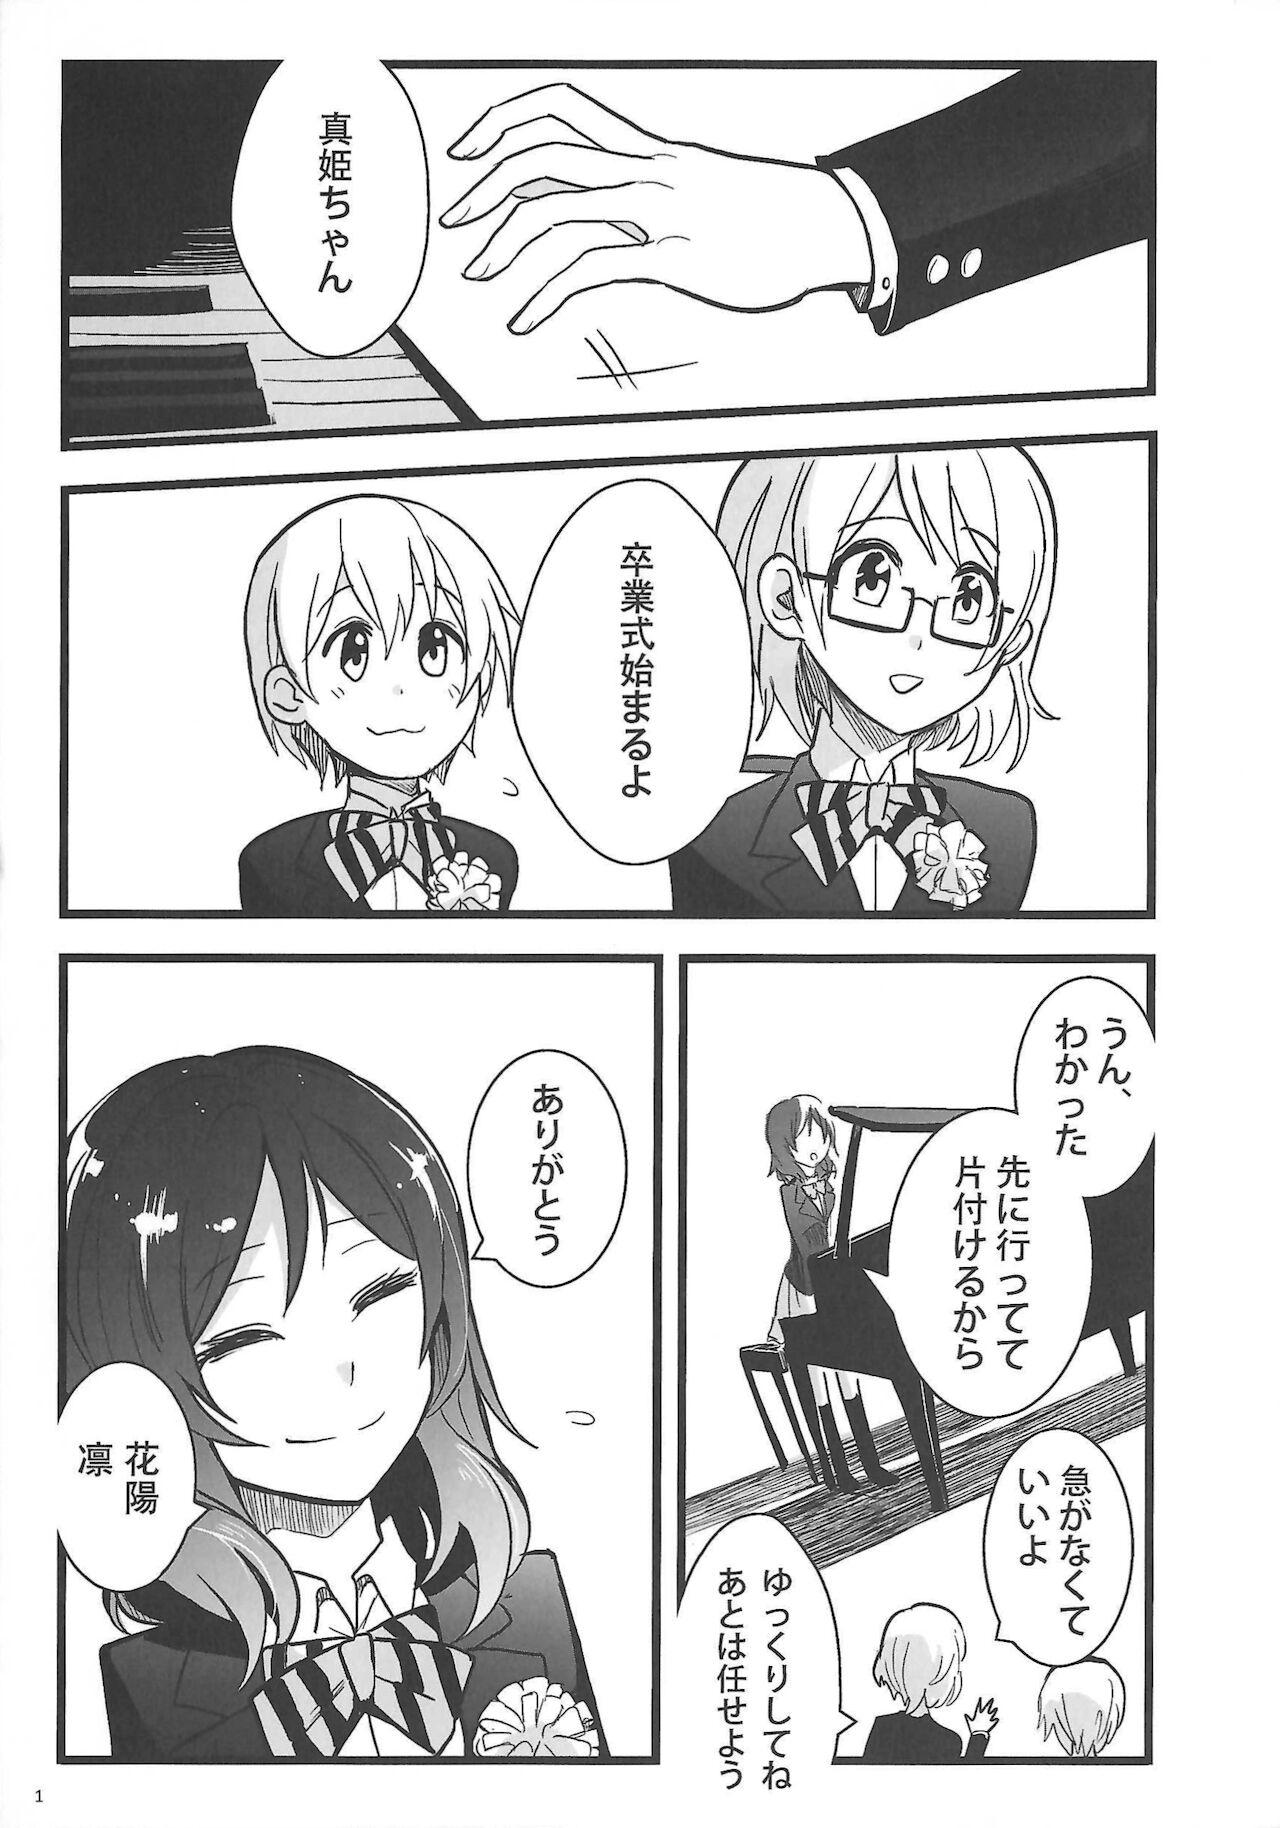 Viet Ode to Losers - Love live Officesex - Page 2